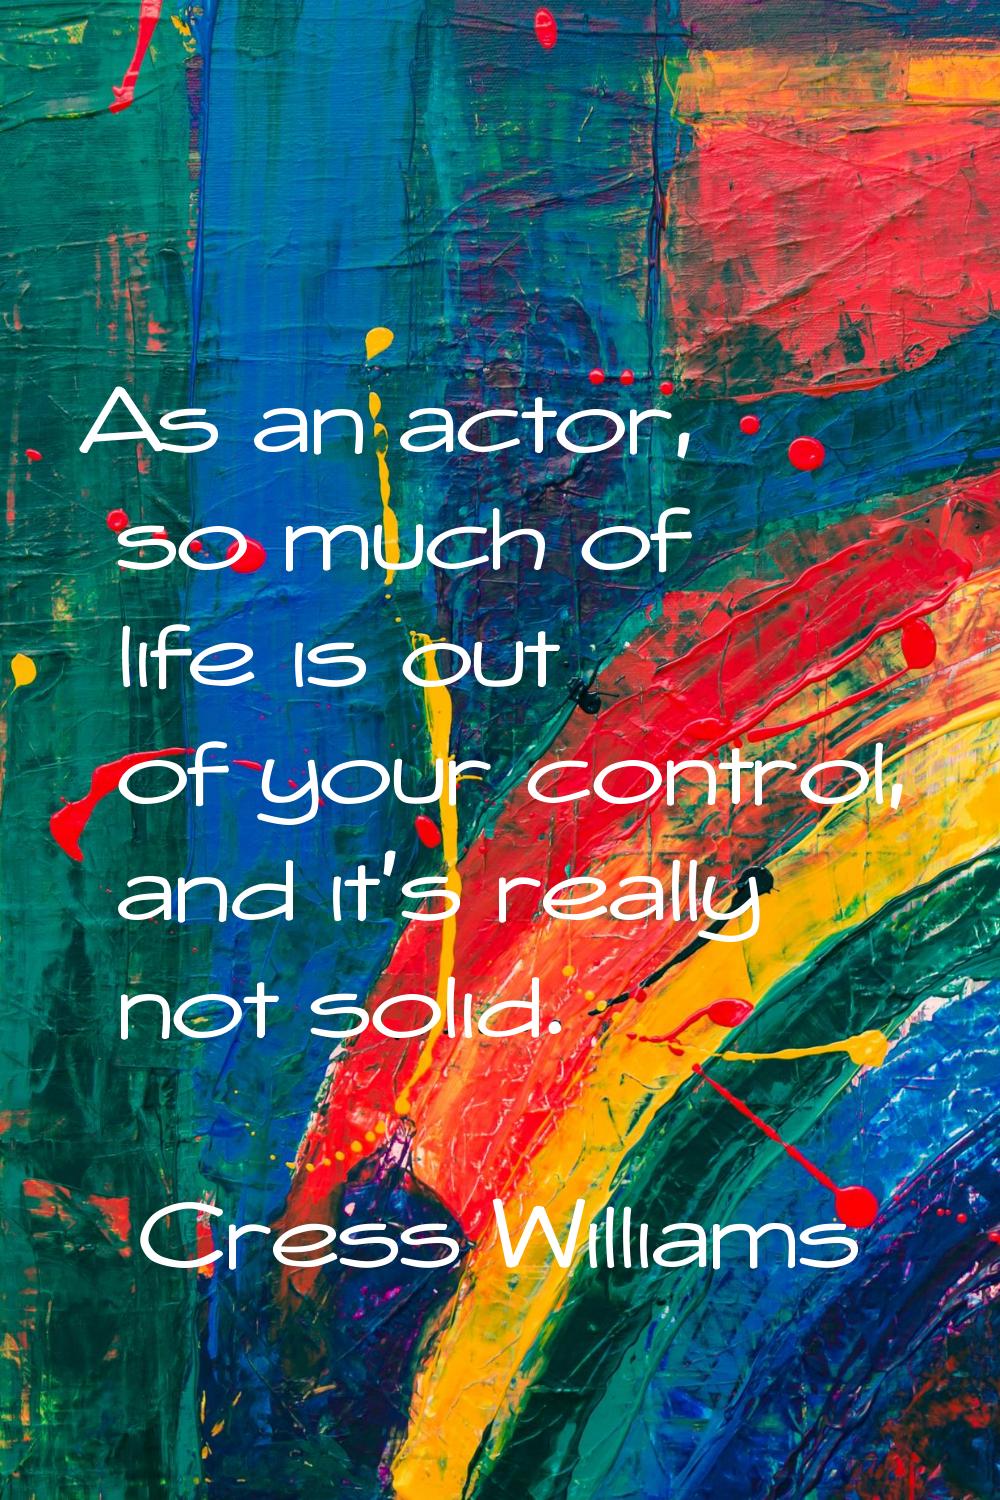 As an actor, so much of life is out of your control, and it's really not solid.